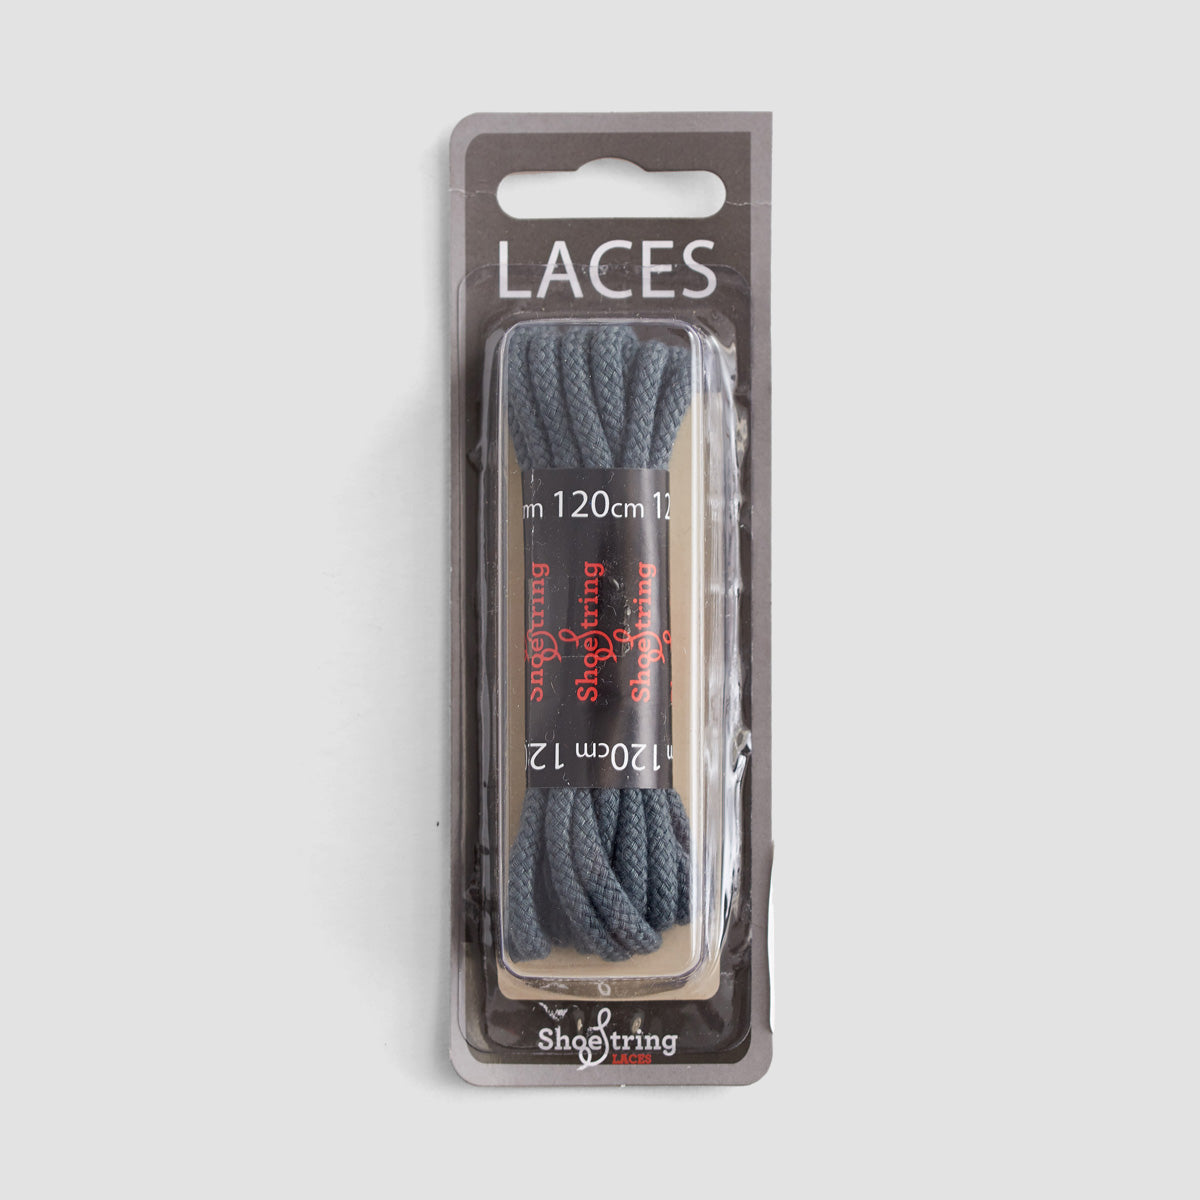 ShoeString Cord 120cm Laces (Blister Pack) Grey